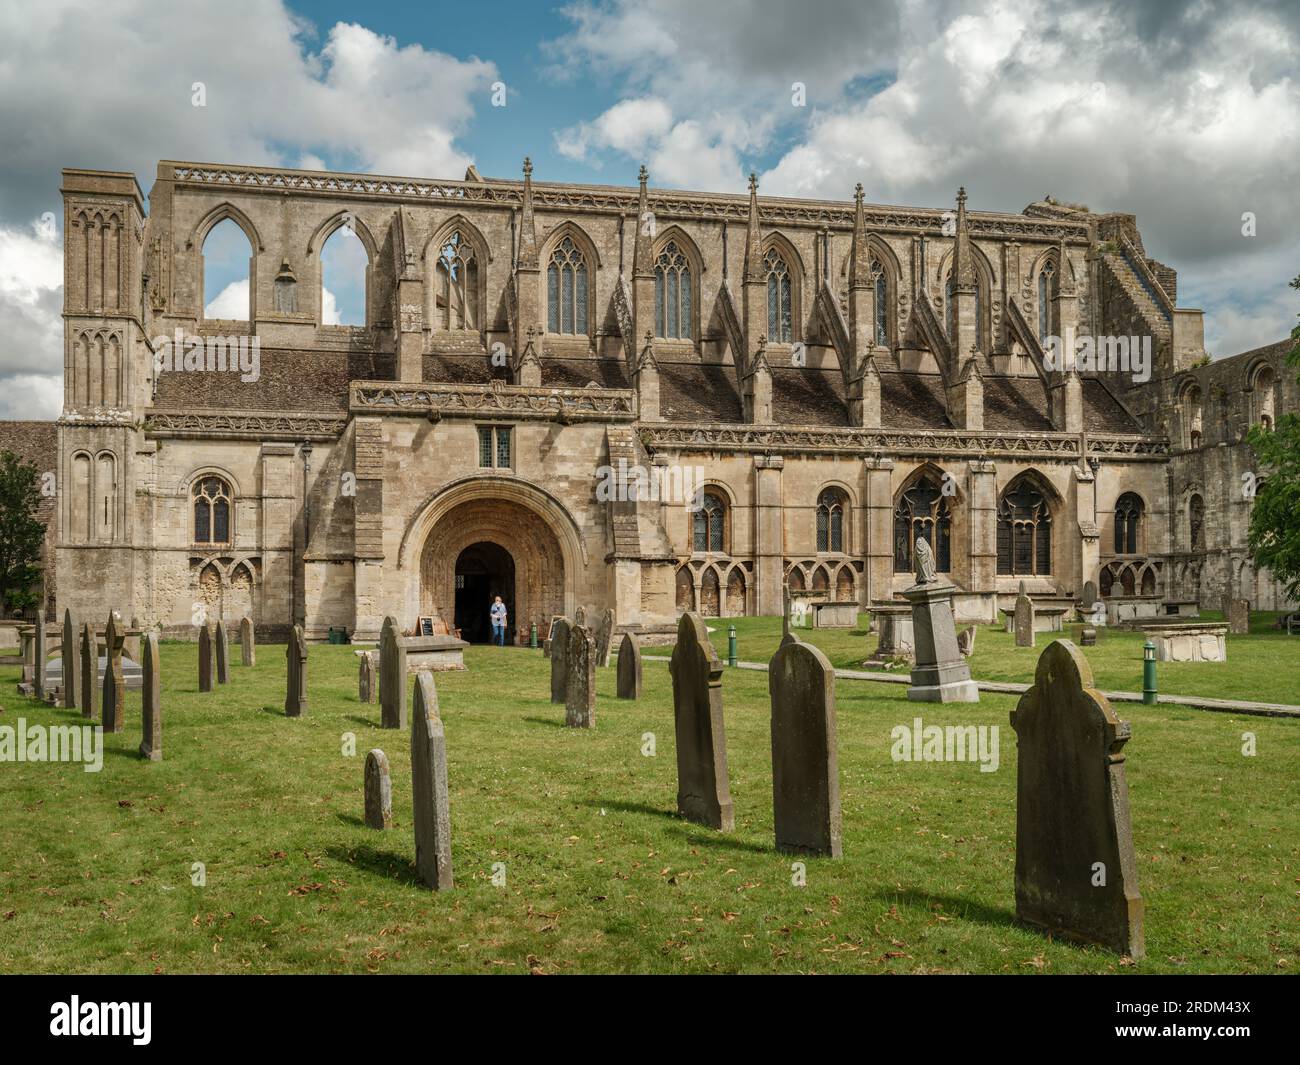 Summer sunshine lights up the front of the historic abbey at the Cotswold market town of Malmesbury. The historic abbey was founded as a Benedictine m Stock Photo